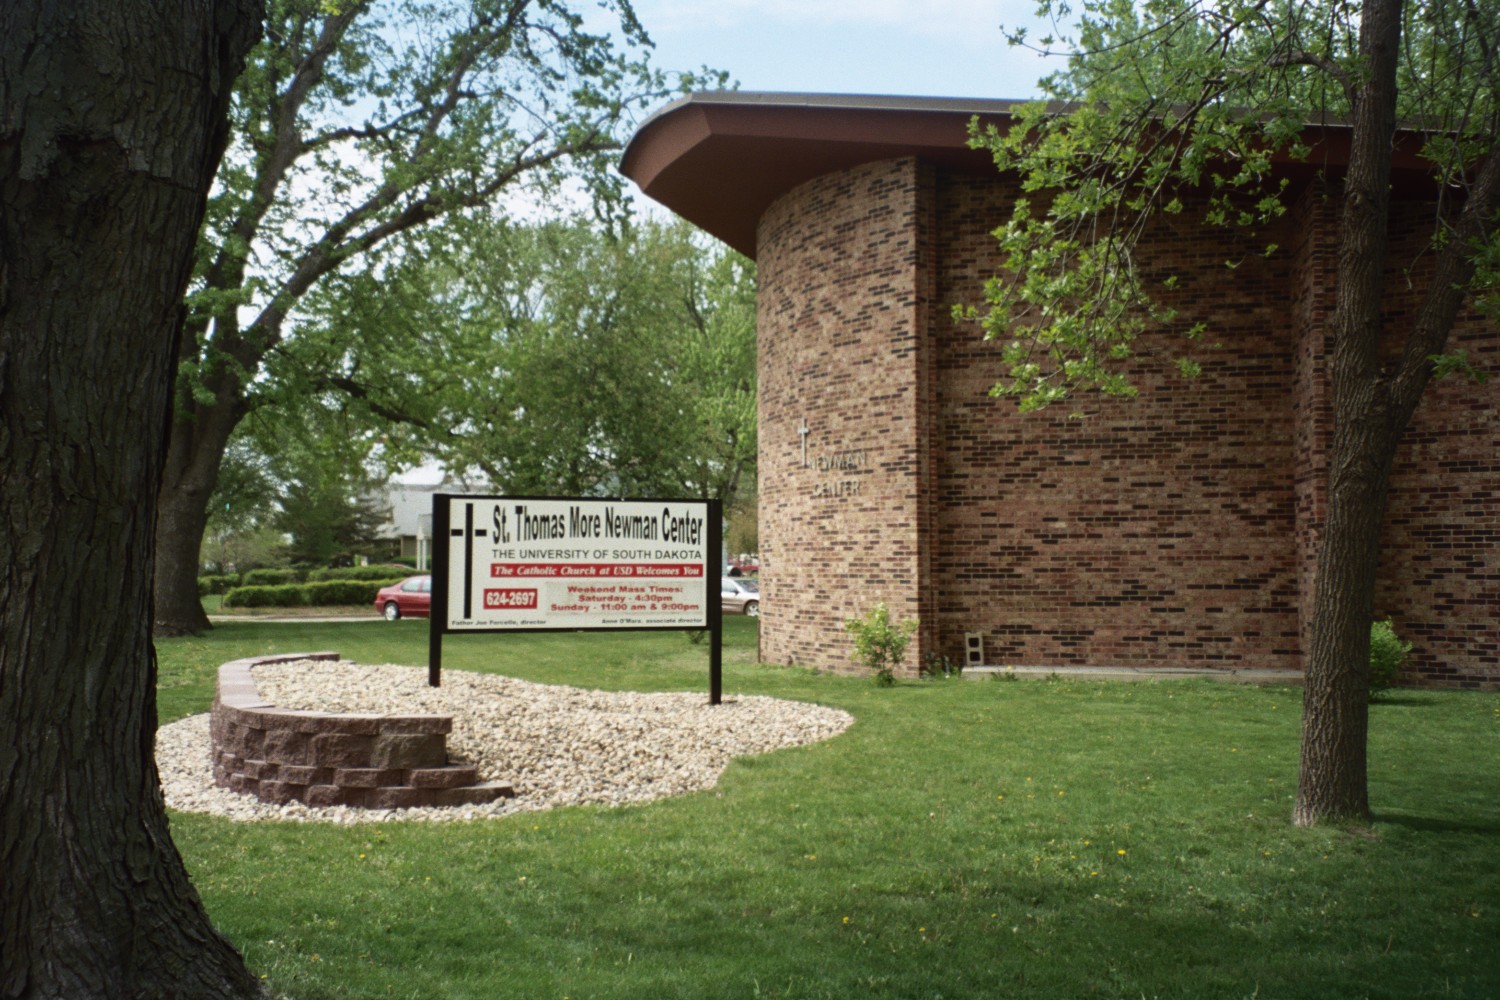 St. Thomas More Newman Center Parishes in the Diocese of Sioux Falls